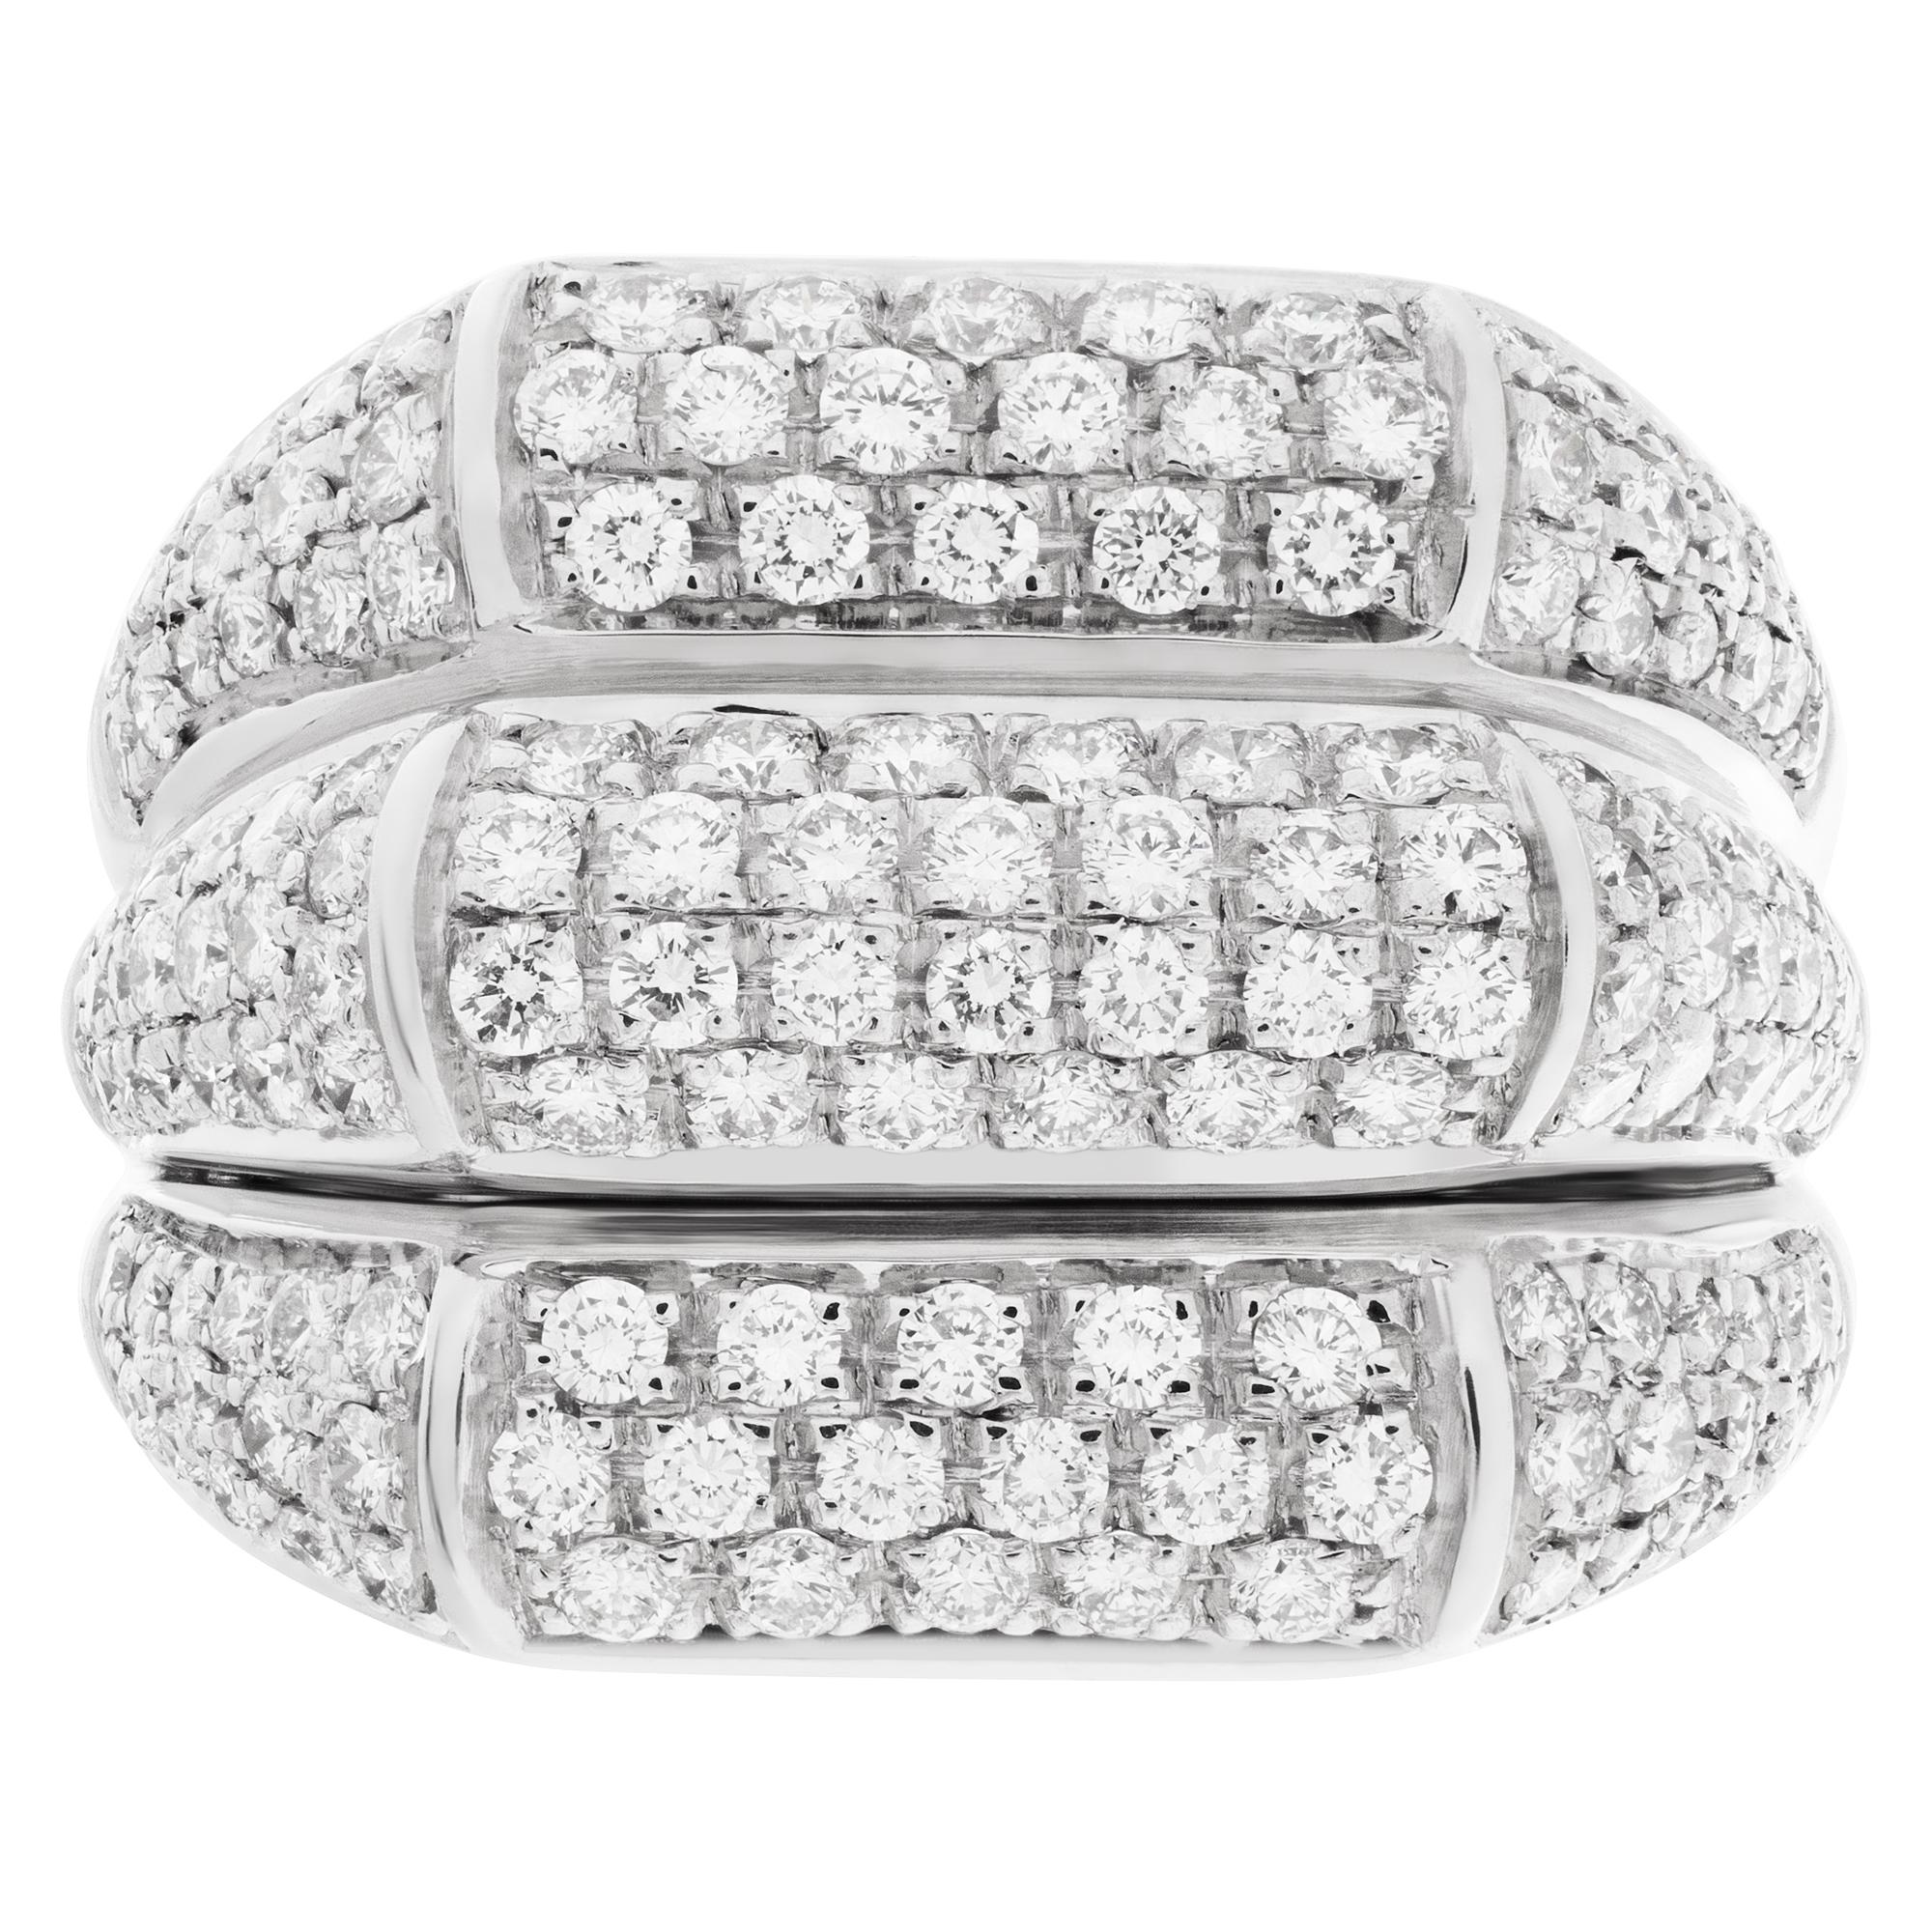 Elegant three-row pave diamond ring in 18k white gold with approximately 2.5 carats in round cut G-H color, VS clarity diamonds. Head measures 23mm x 17mm, shank 5mm thick. Size 7.

This Diamond ring is currently size 7 and some items can be sized